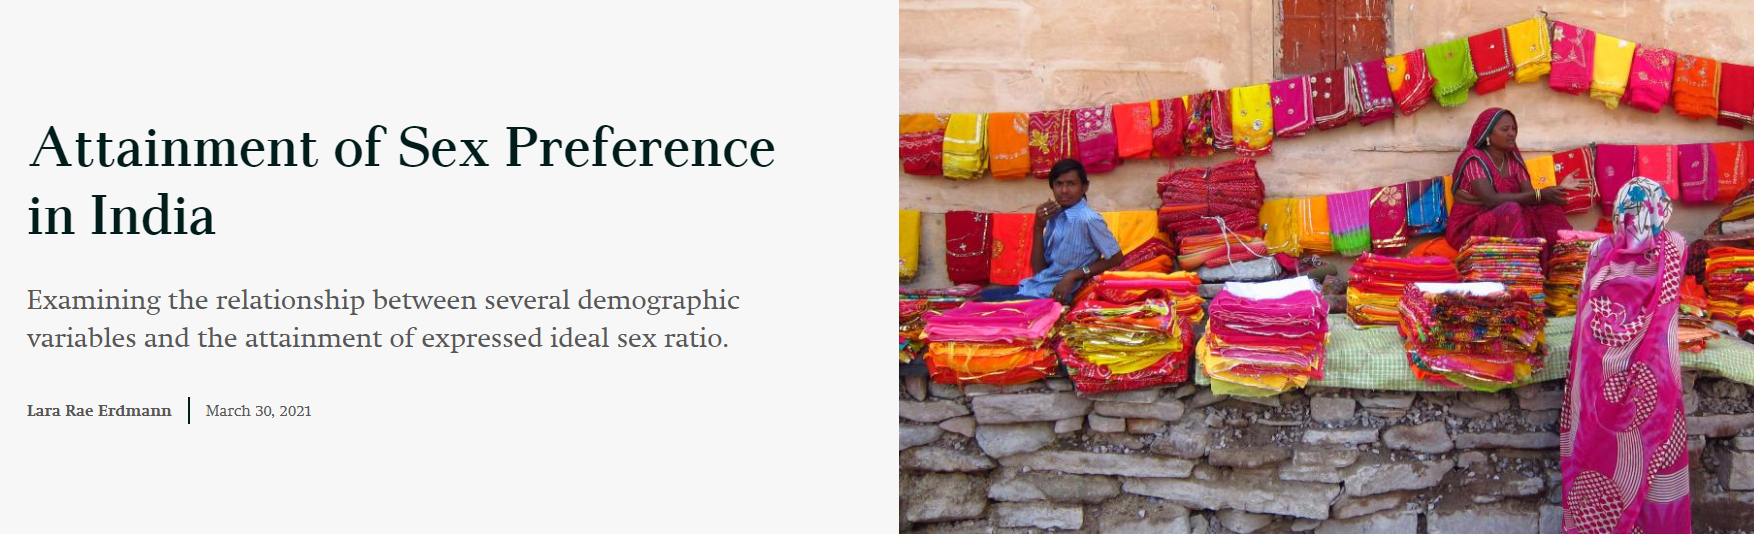 Attainment of Sex Preference in India